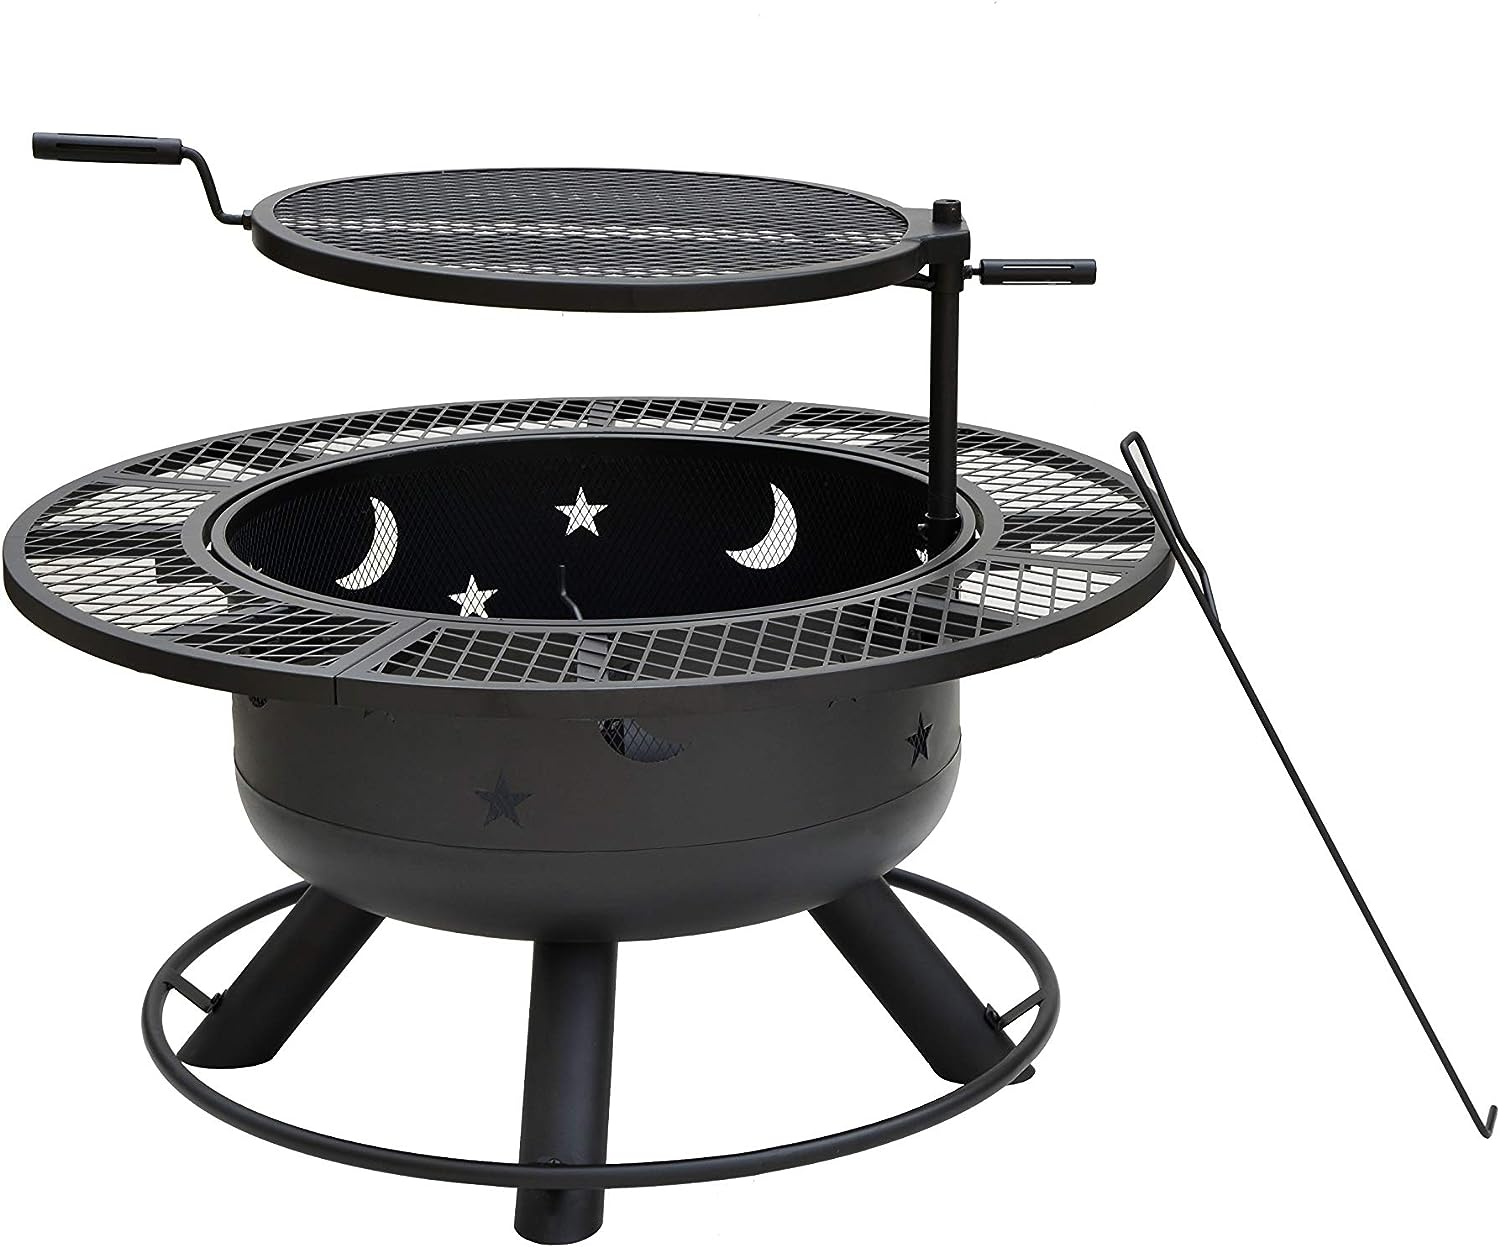 Bond Manufacturing 52124 Nightstar 32.7" Round Wood Burning Steel Fire Pit with Grill, Black